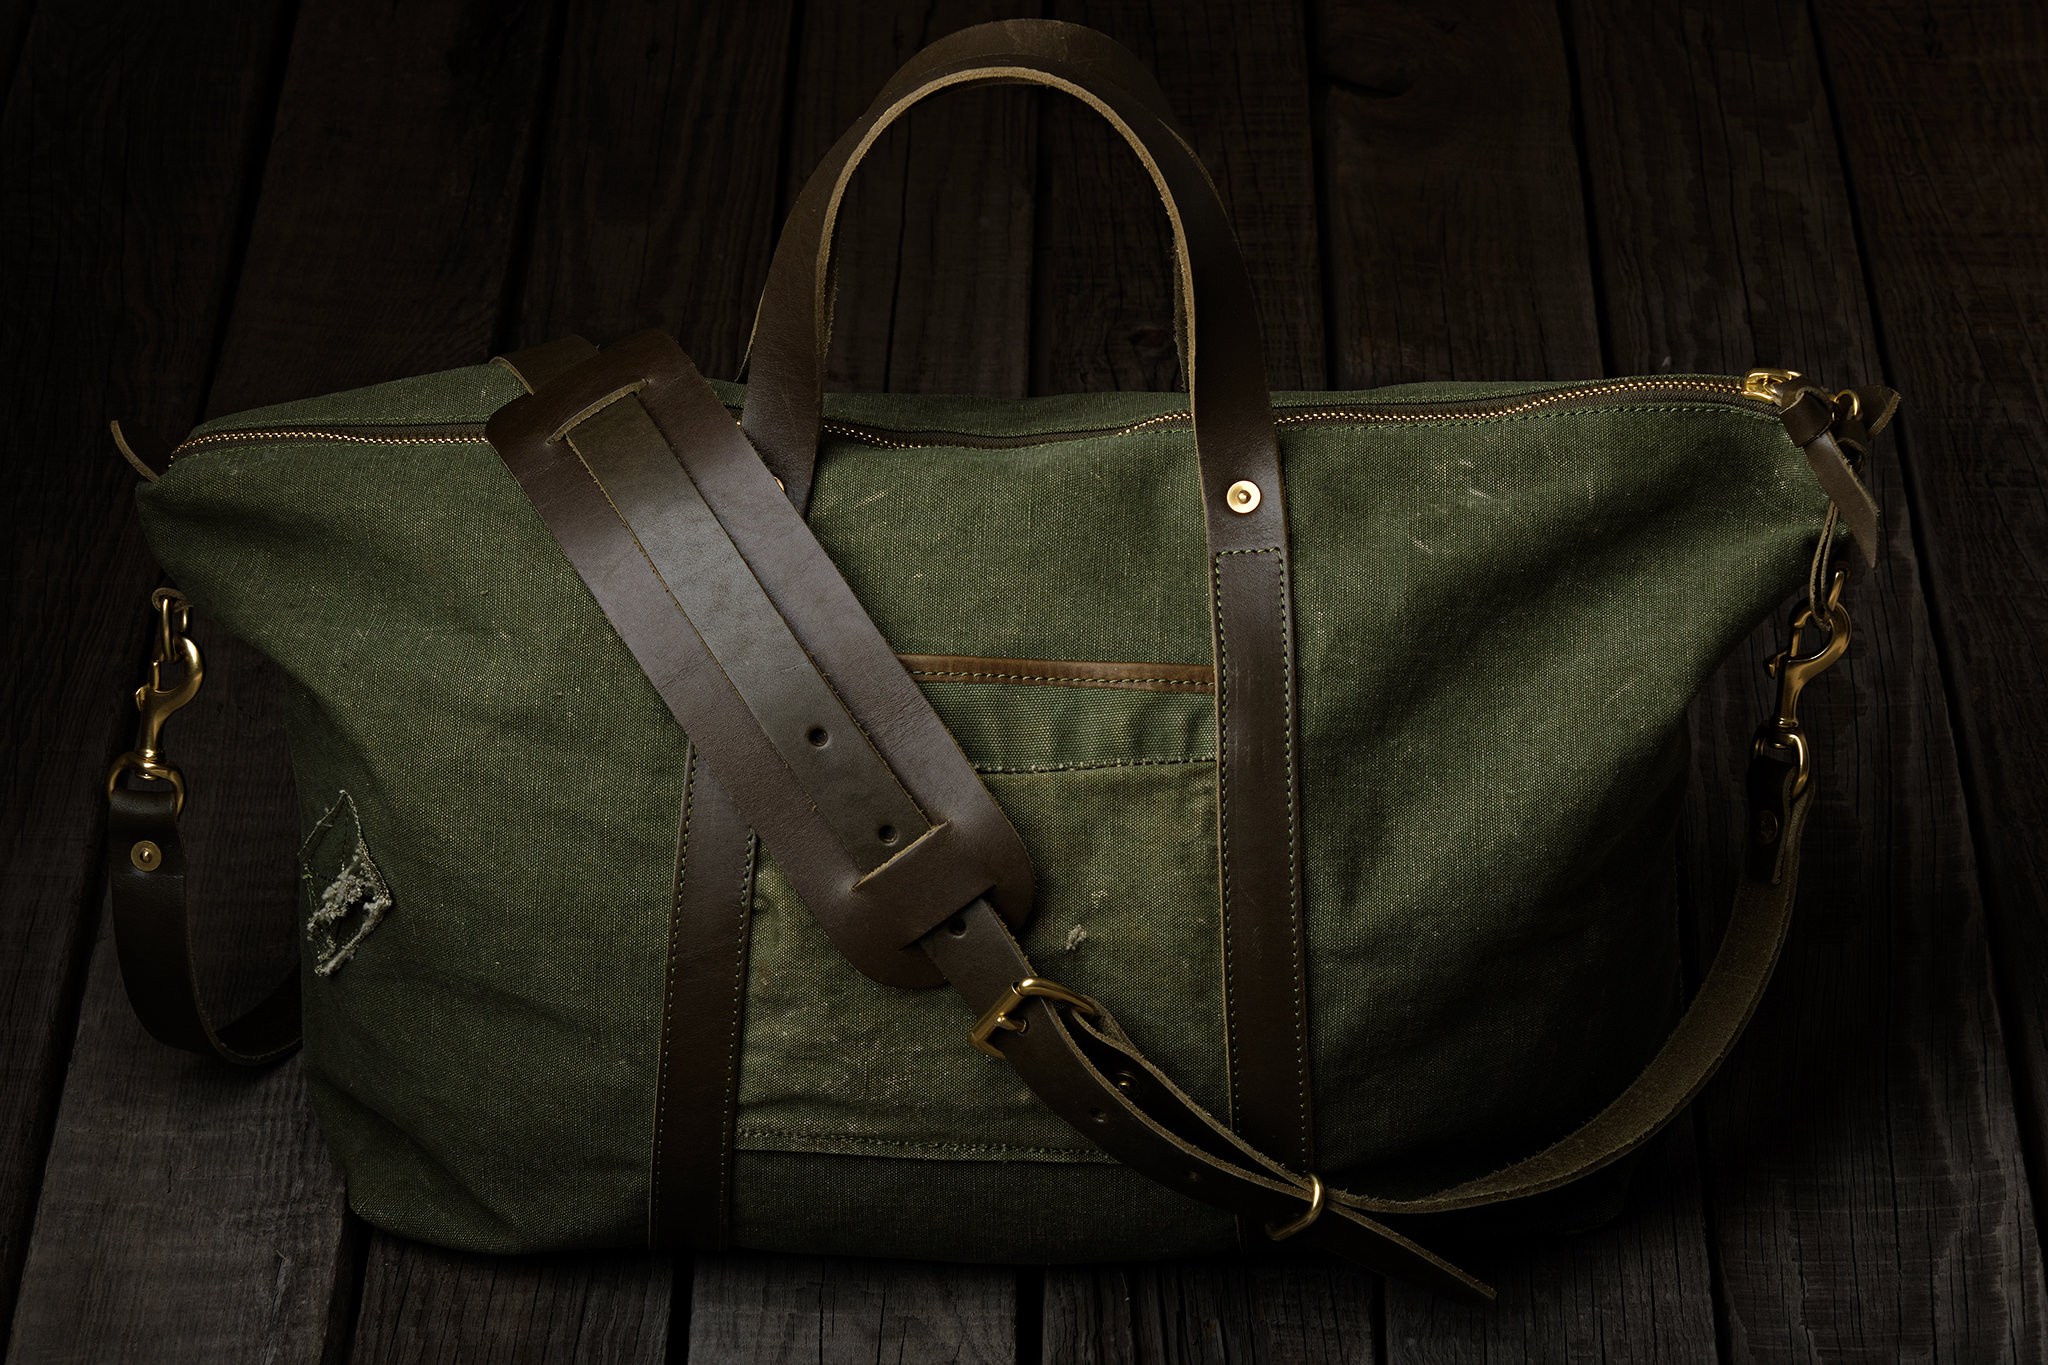 Large Duffel Bag Upcycled Military Canvas Leather Duffle 